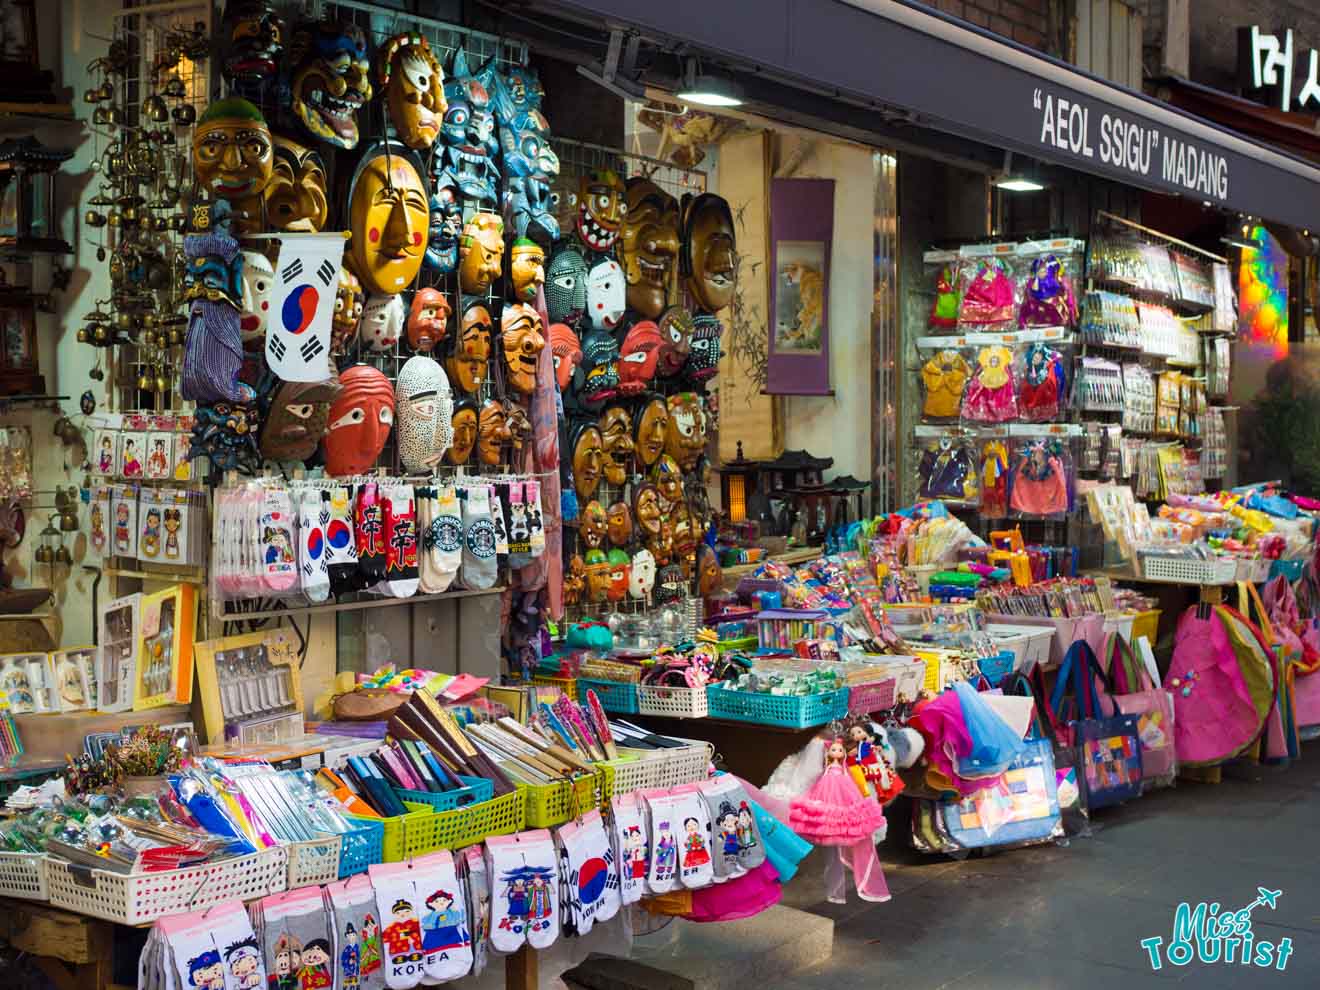 A colorful market stall displaying traditional masks, various souvenirs, stationery, and bags. The shop is named "Aeq Sagig Madang" and has "Miss Tourist" signage.